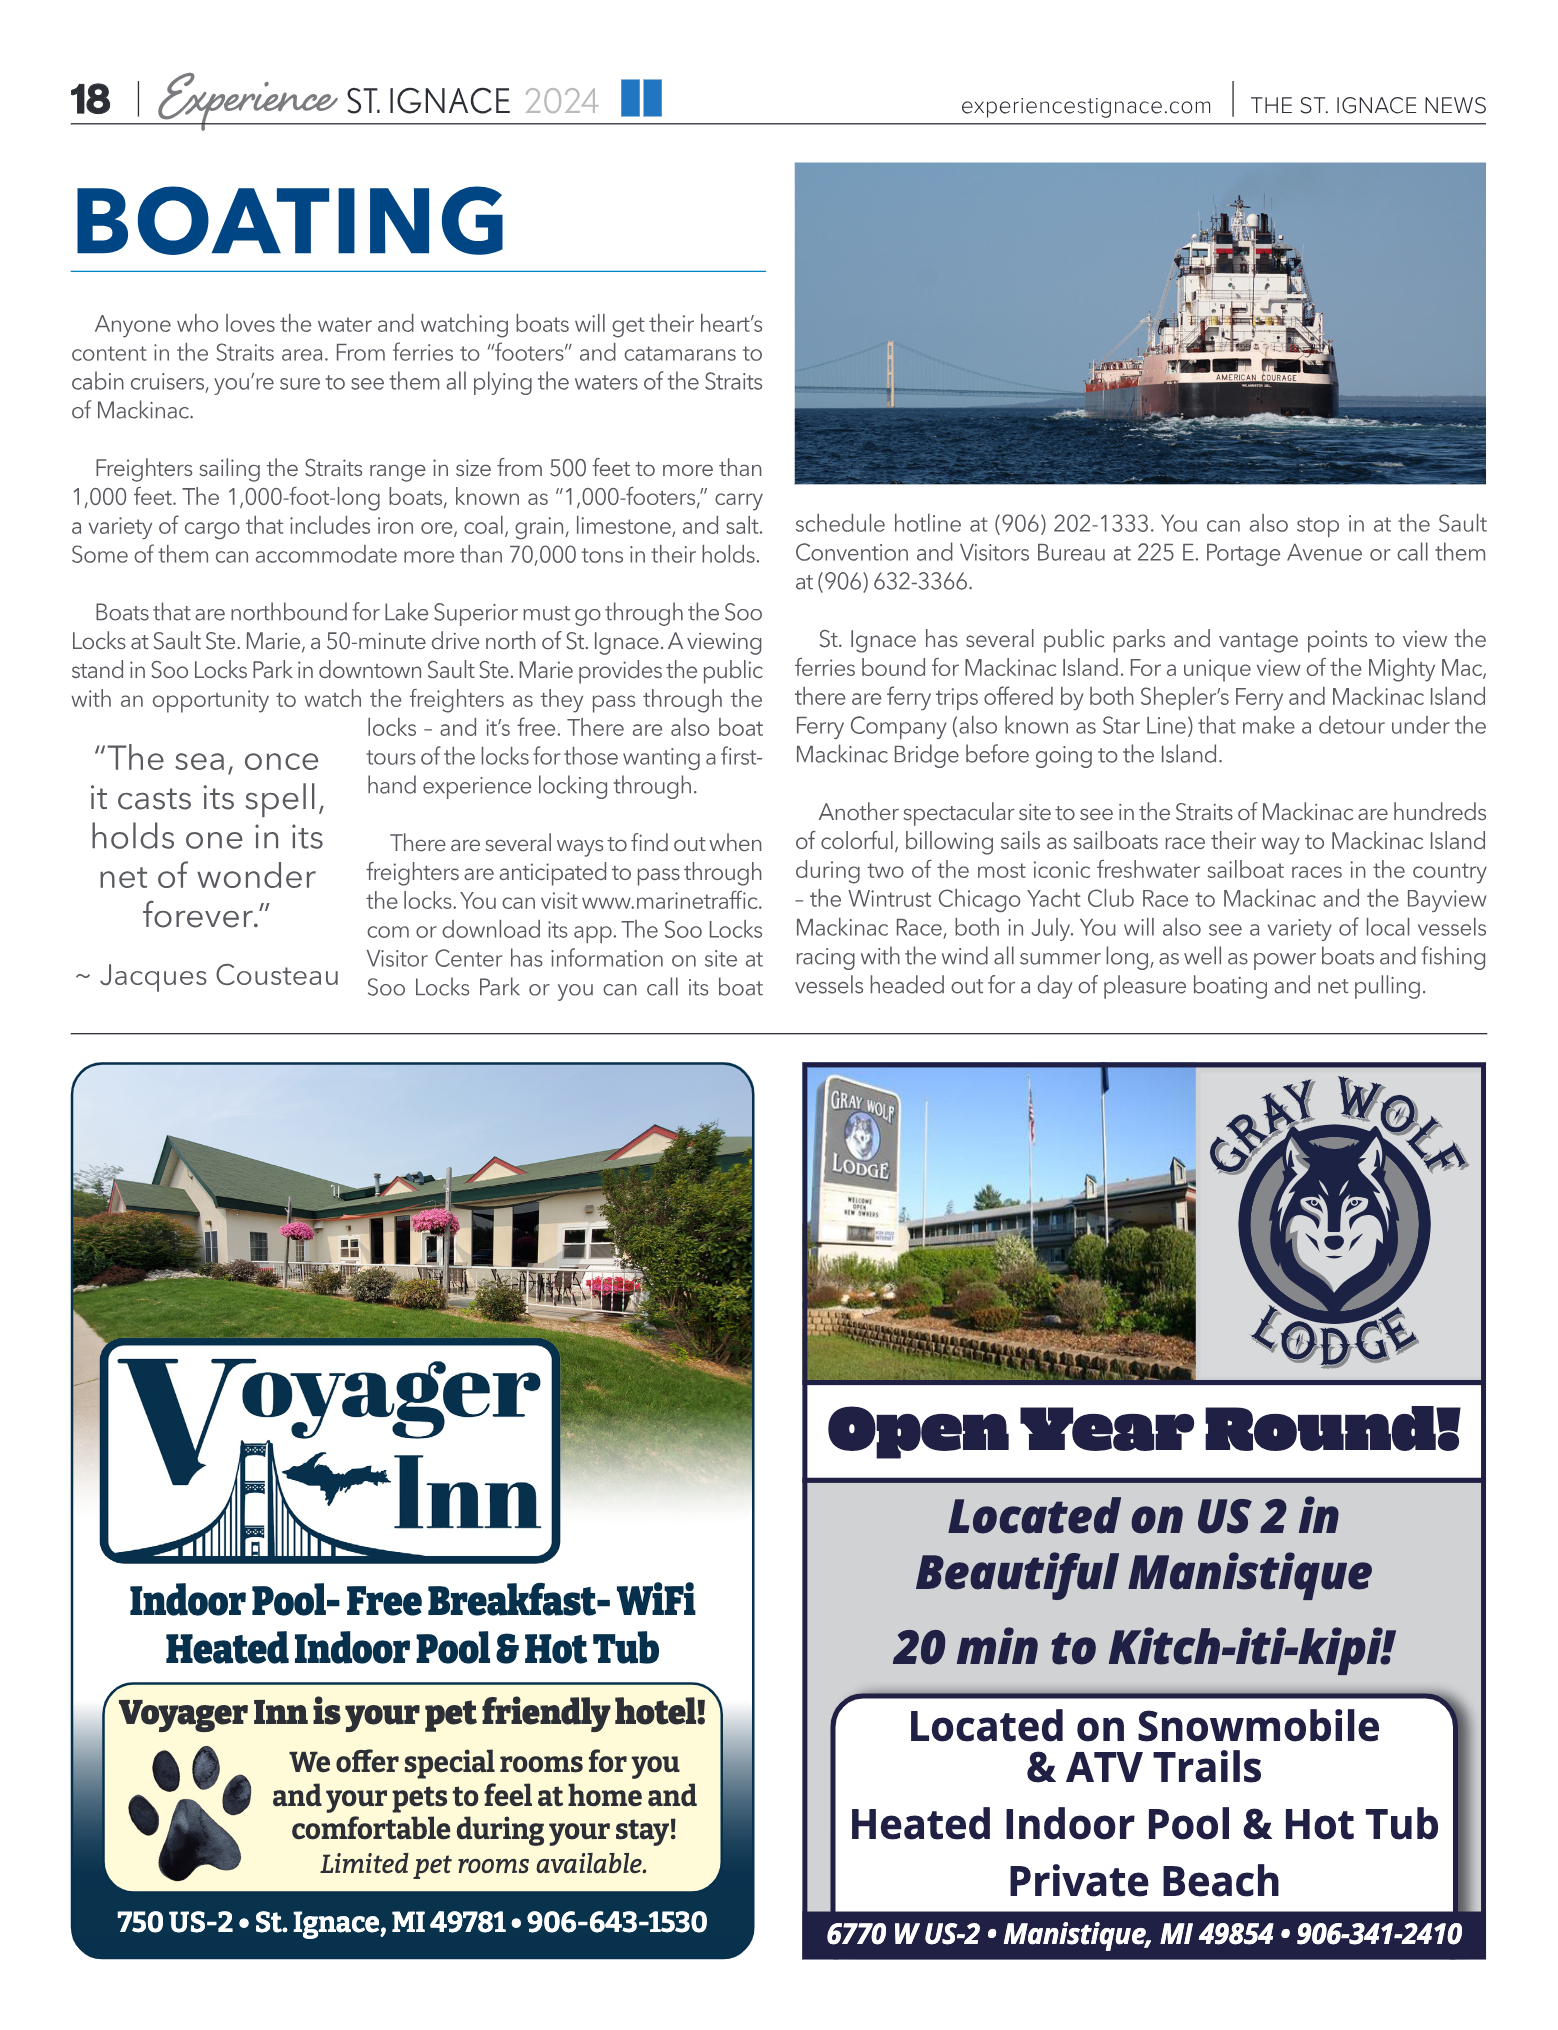 Experience St. Ignace - Guest Travel Guide 2024 - page 18